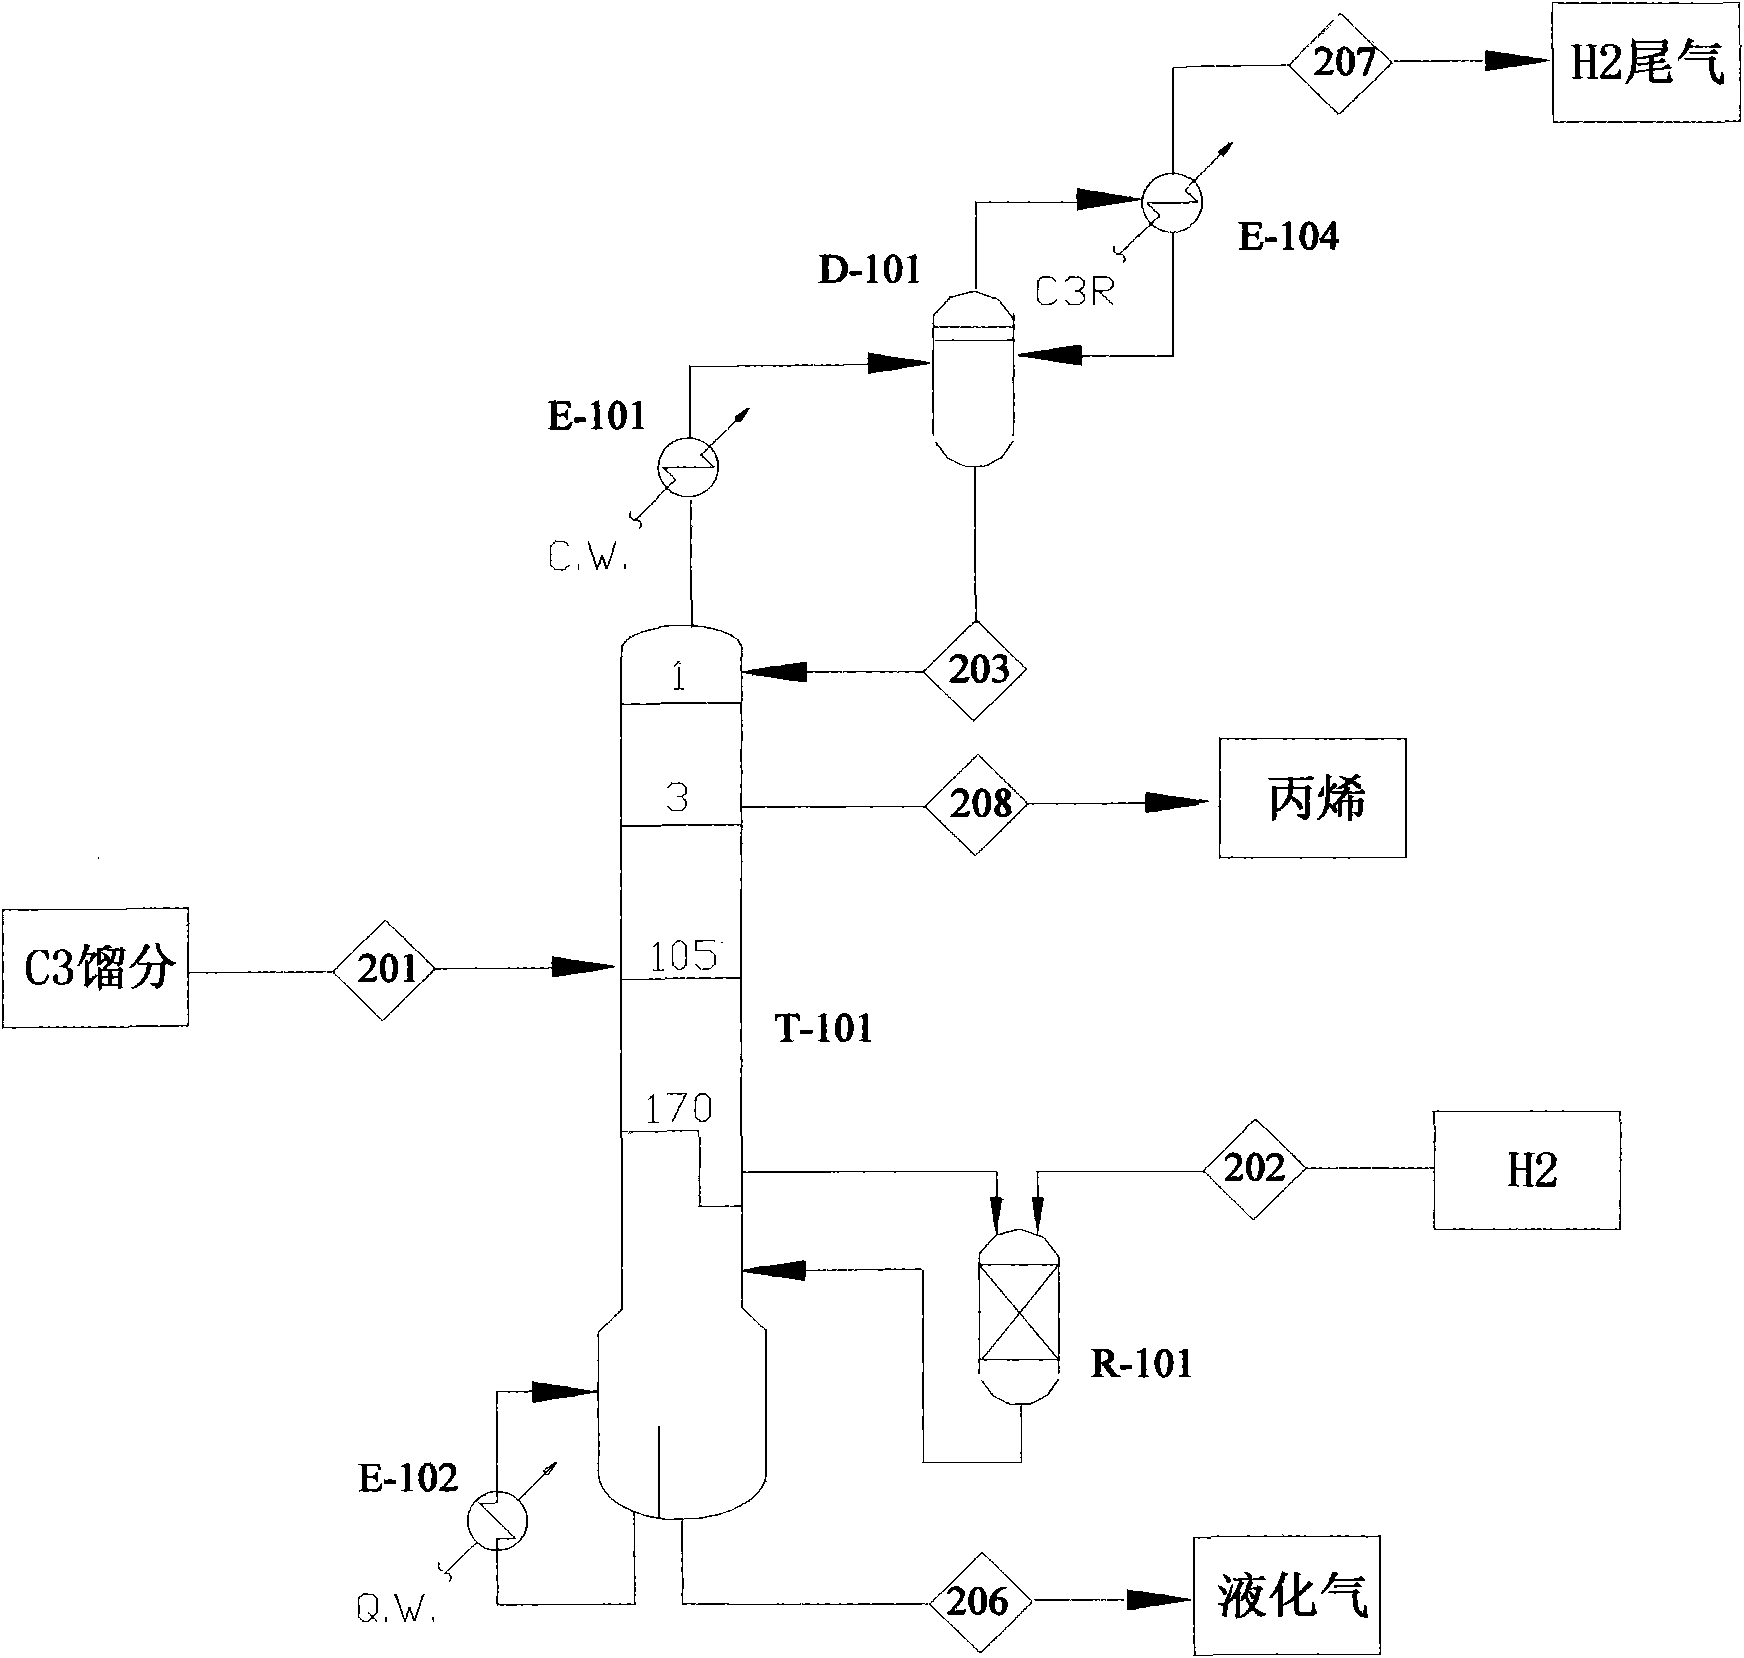 Process of carrying out reaction, rectifying and coupling to selectively hydrogenate to remove MAPD (Methylacetylene Propadiene)